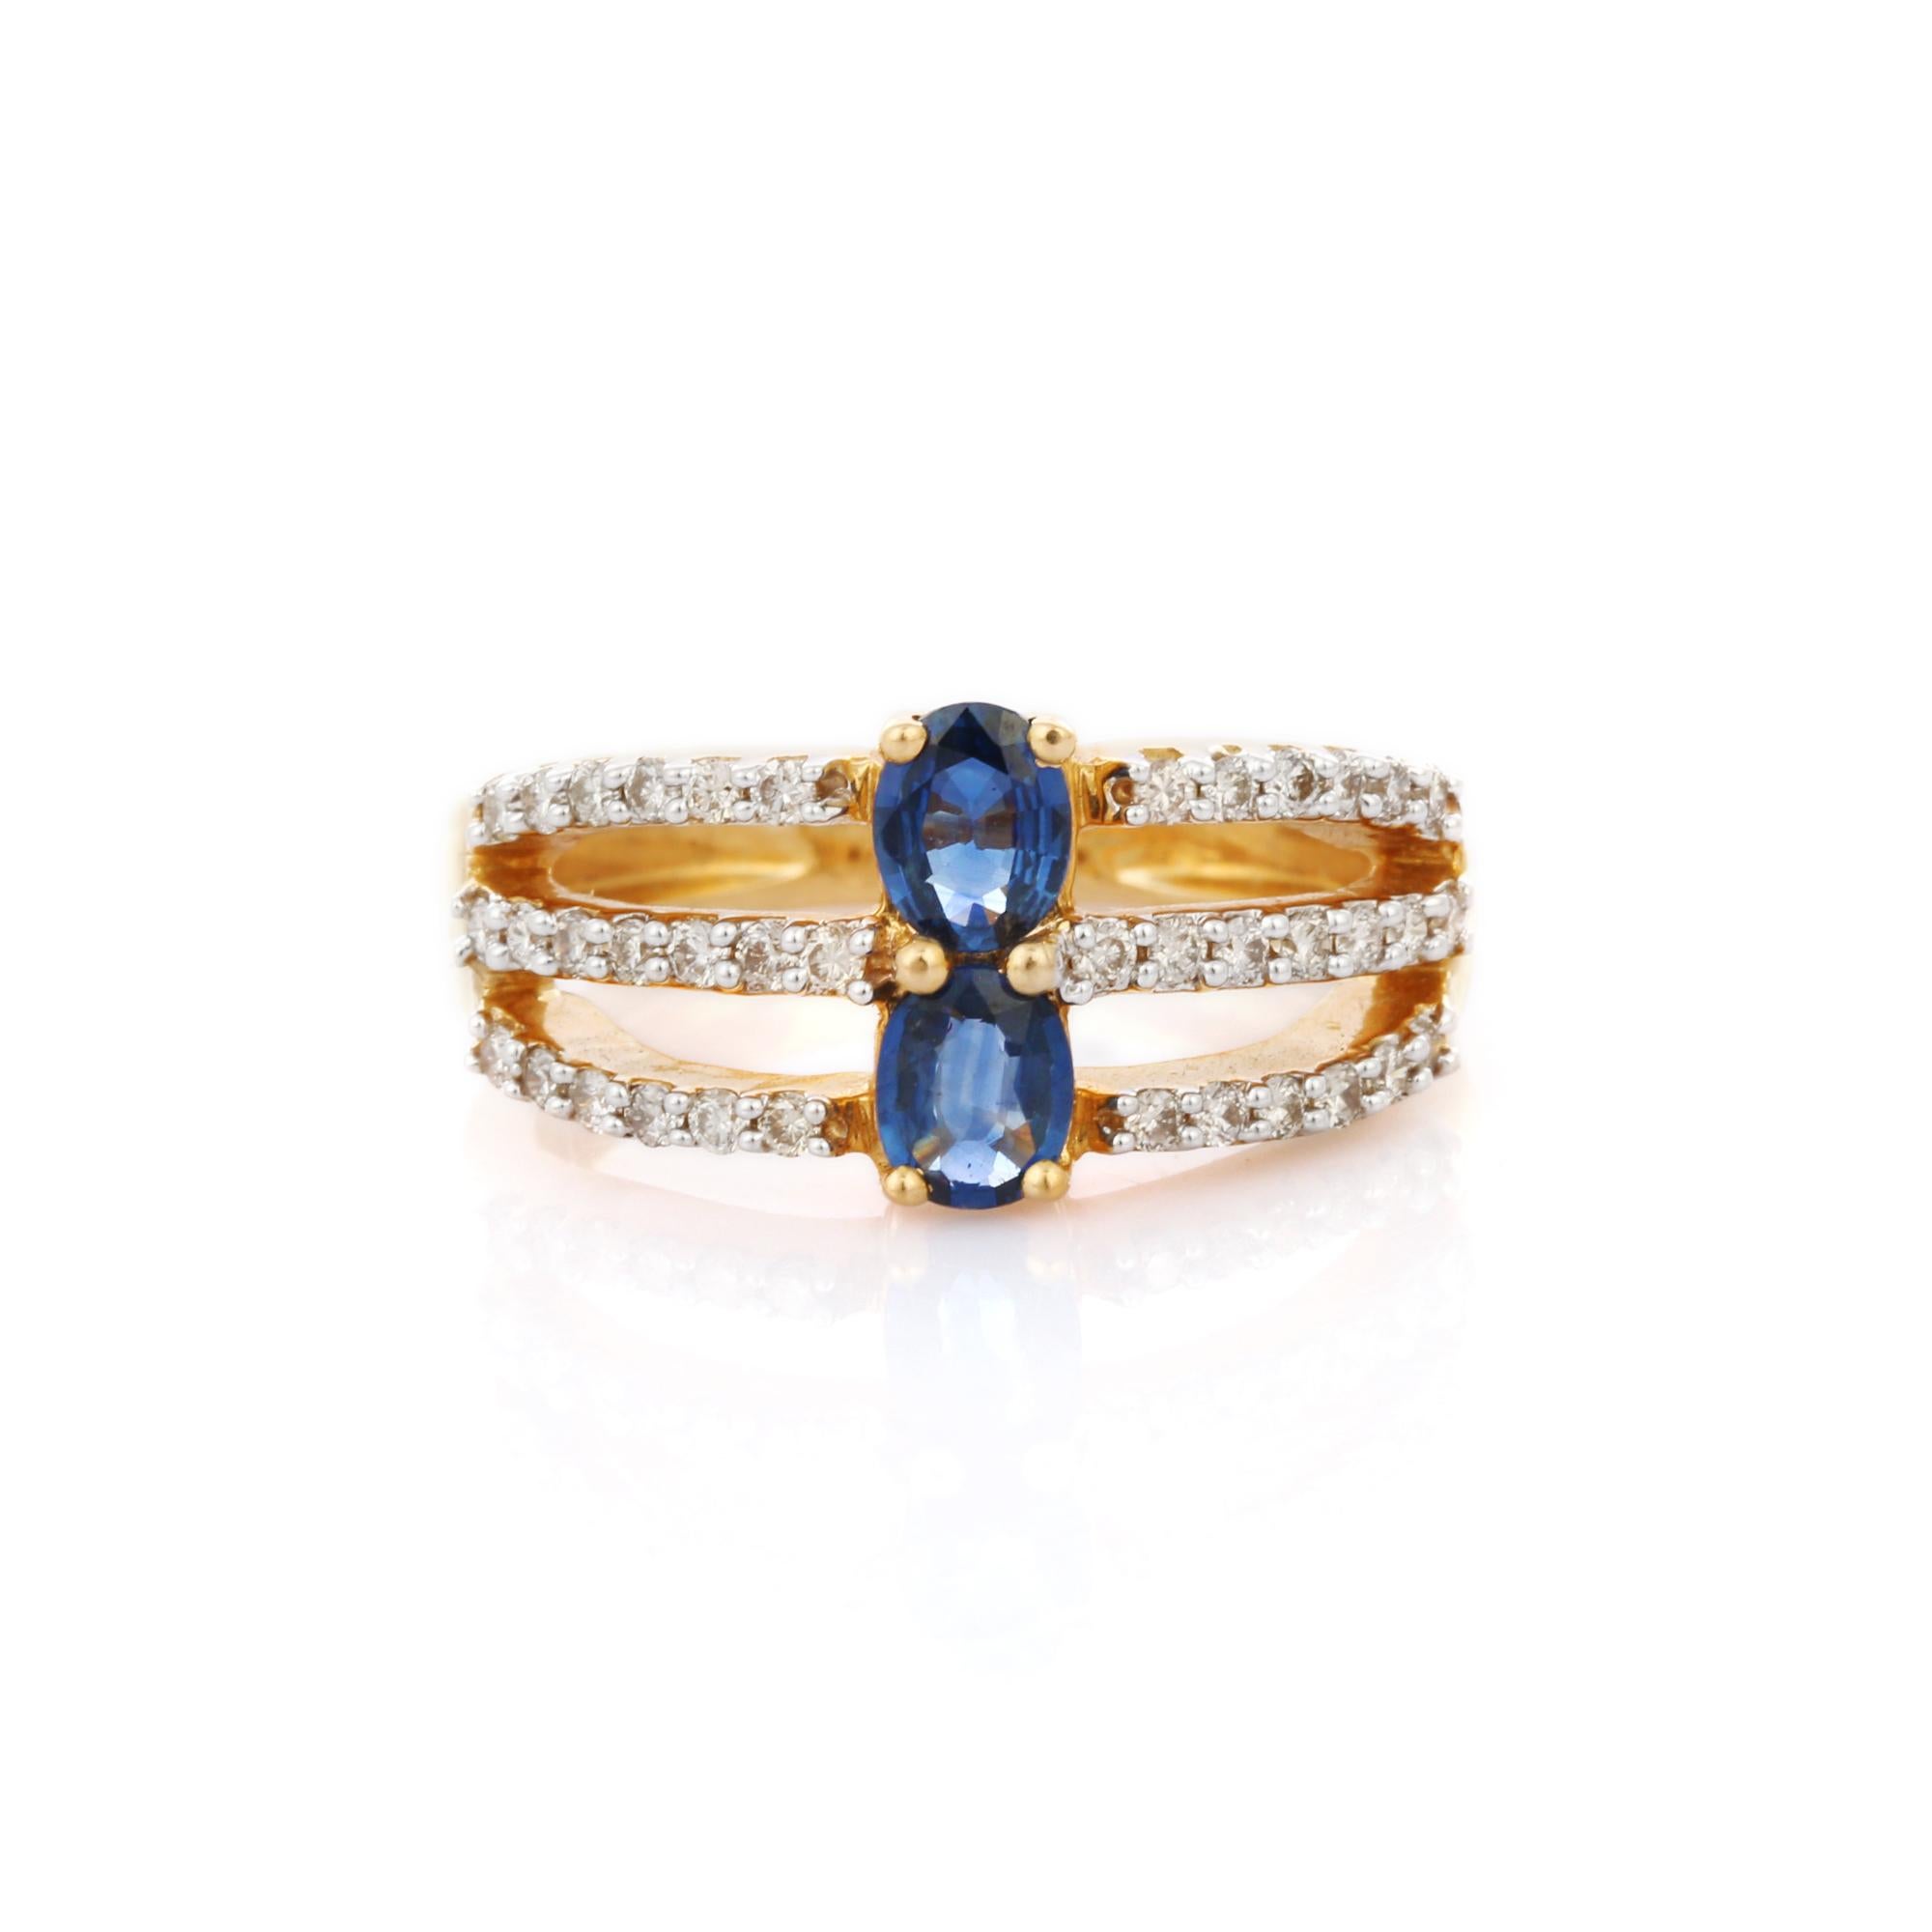 For Sale:  18K Yellow Gold Magnificent Blue Sapphire and Diamond Engagement Ring 5